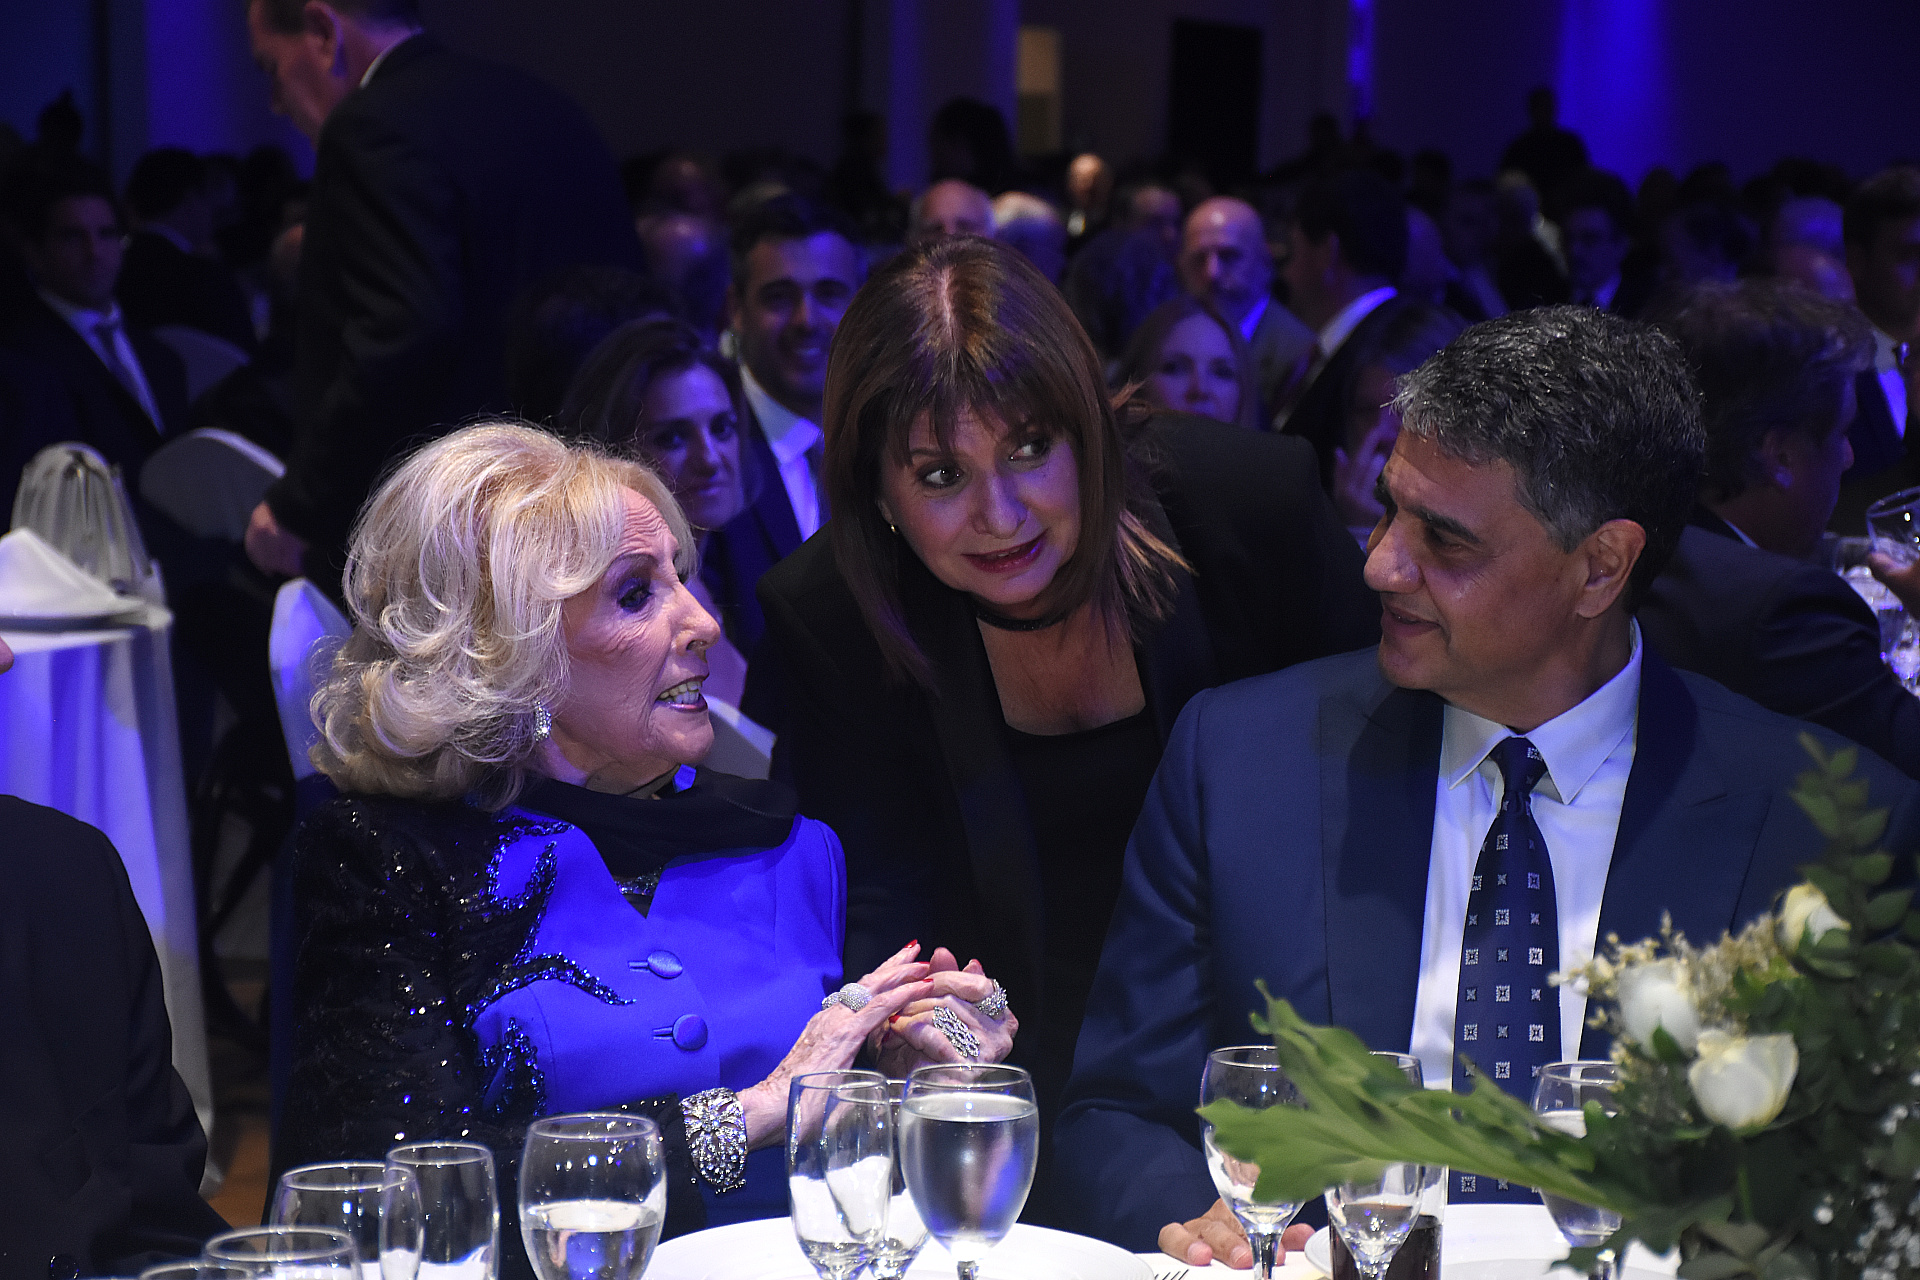 Mirtha Legrand, present at the Fundación Libertad event.  In the image with Patricia Bullrich and Jorge Macri.  (Photo: Nicholas Stulberg)